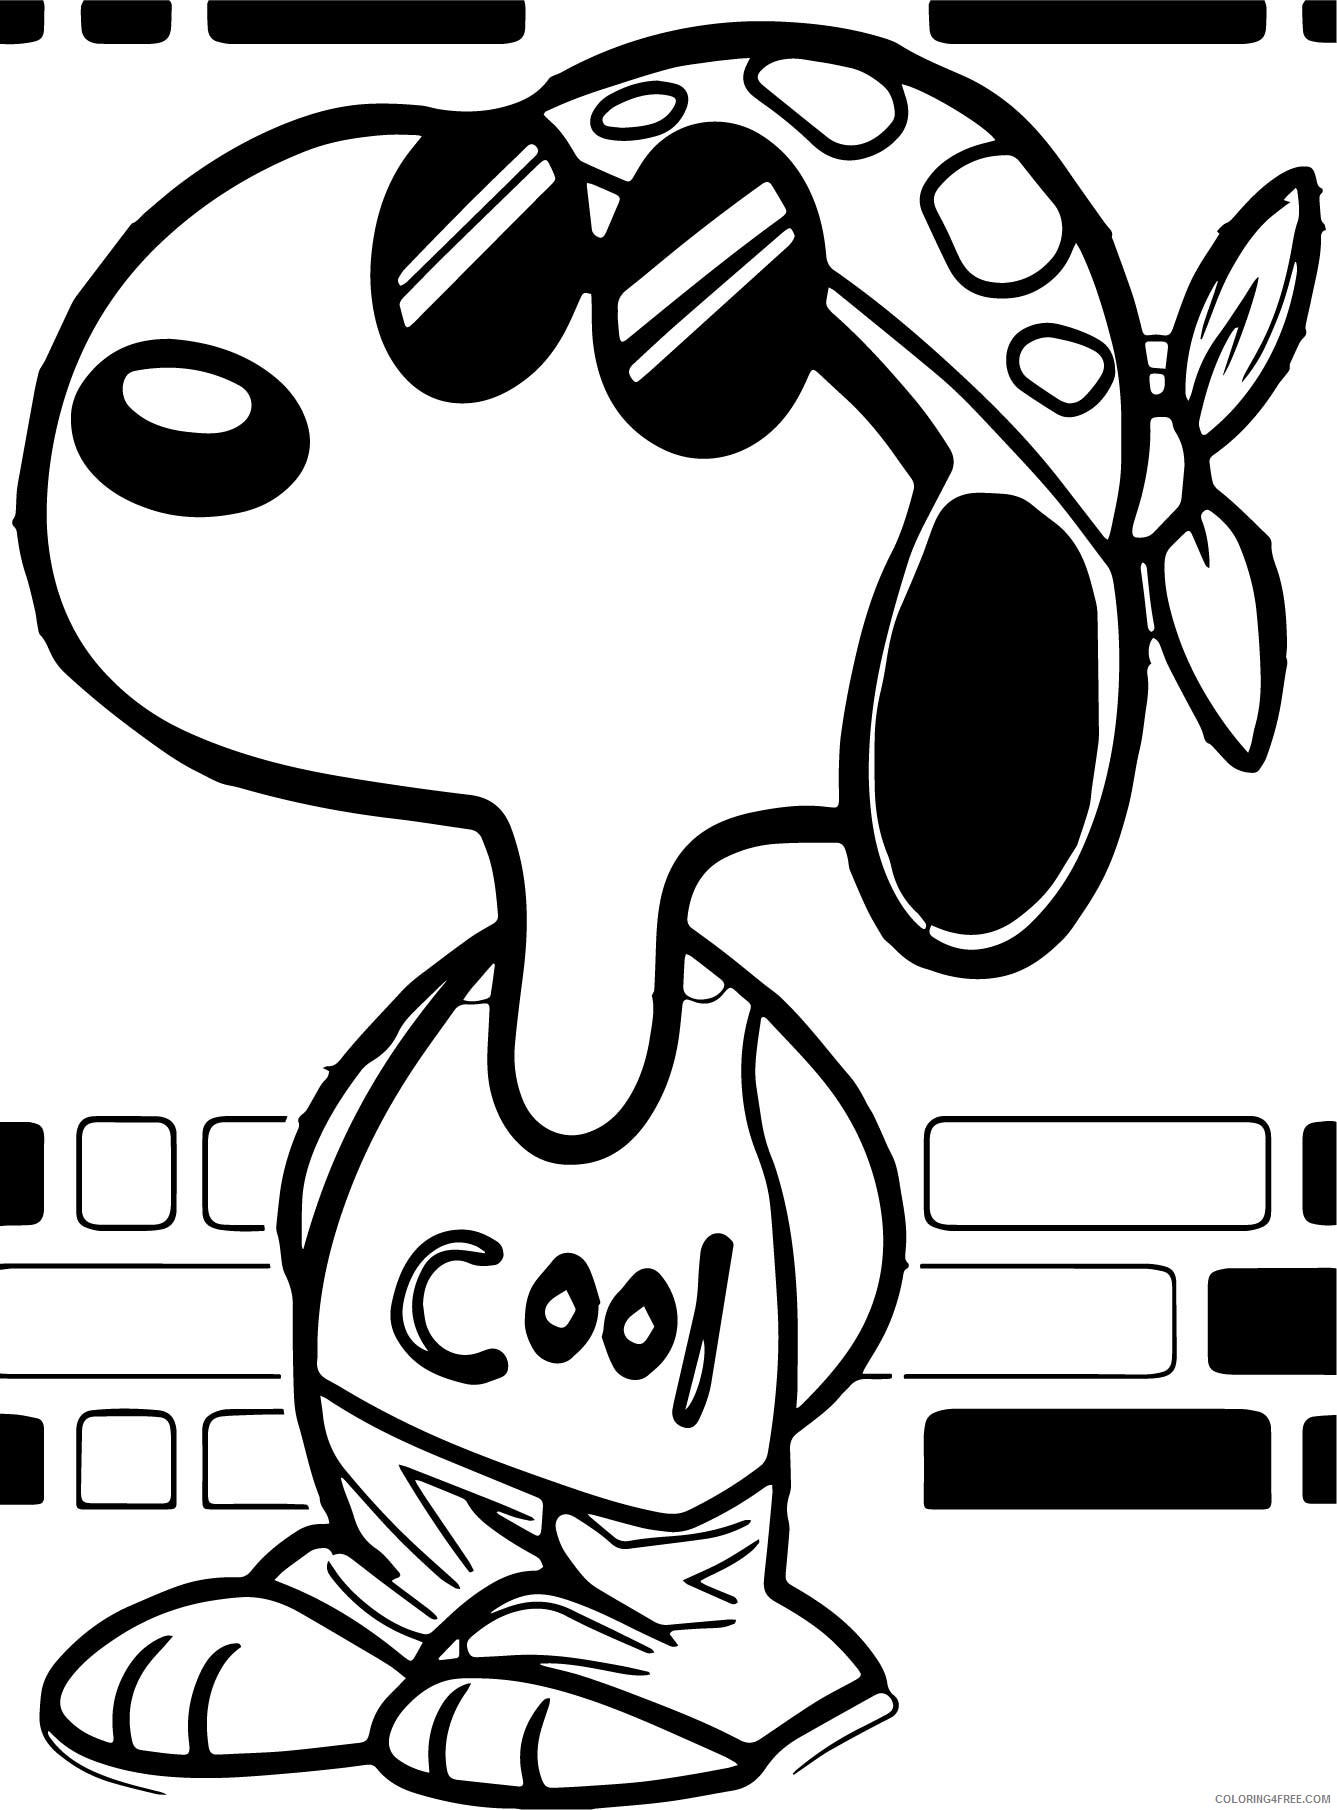 Snoopy Coloring Pages Cartoons 1539418396_joe cool snoopy wecoloringpage with p2n me in Printable 2020 5631 Coloring4free